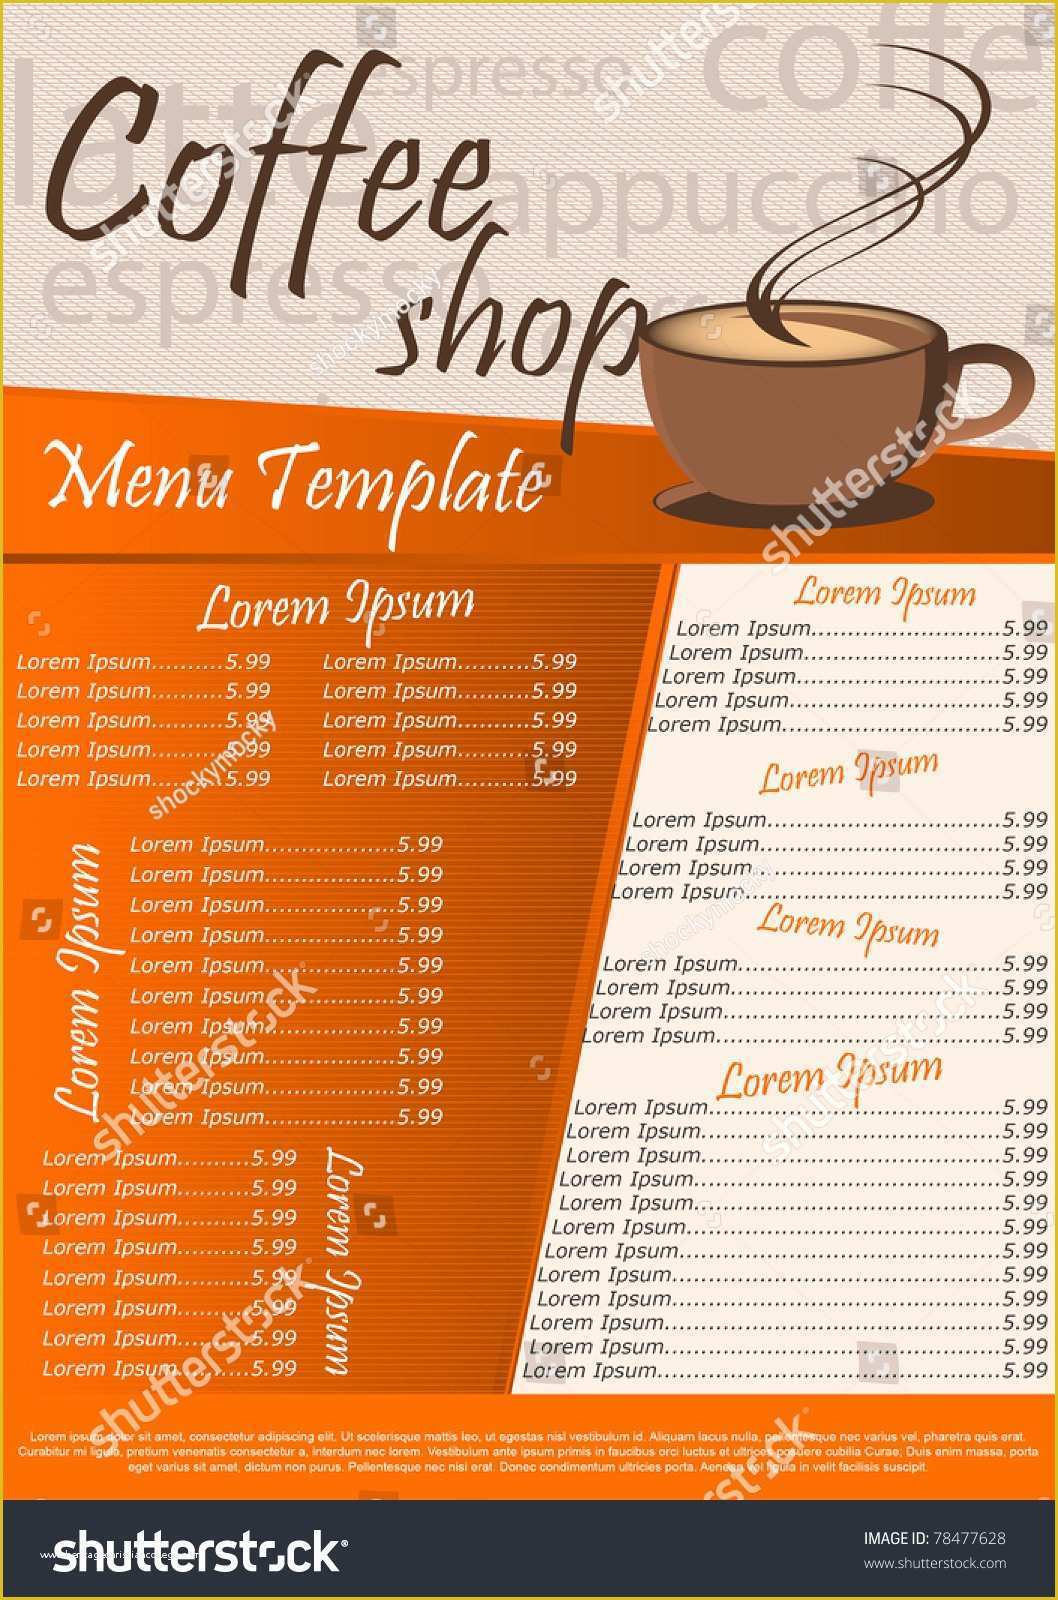 Coffee Shop Website Template Free Download Of Coffee Shop Menu Template Vector Illustration Stock Vector